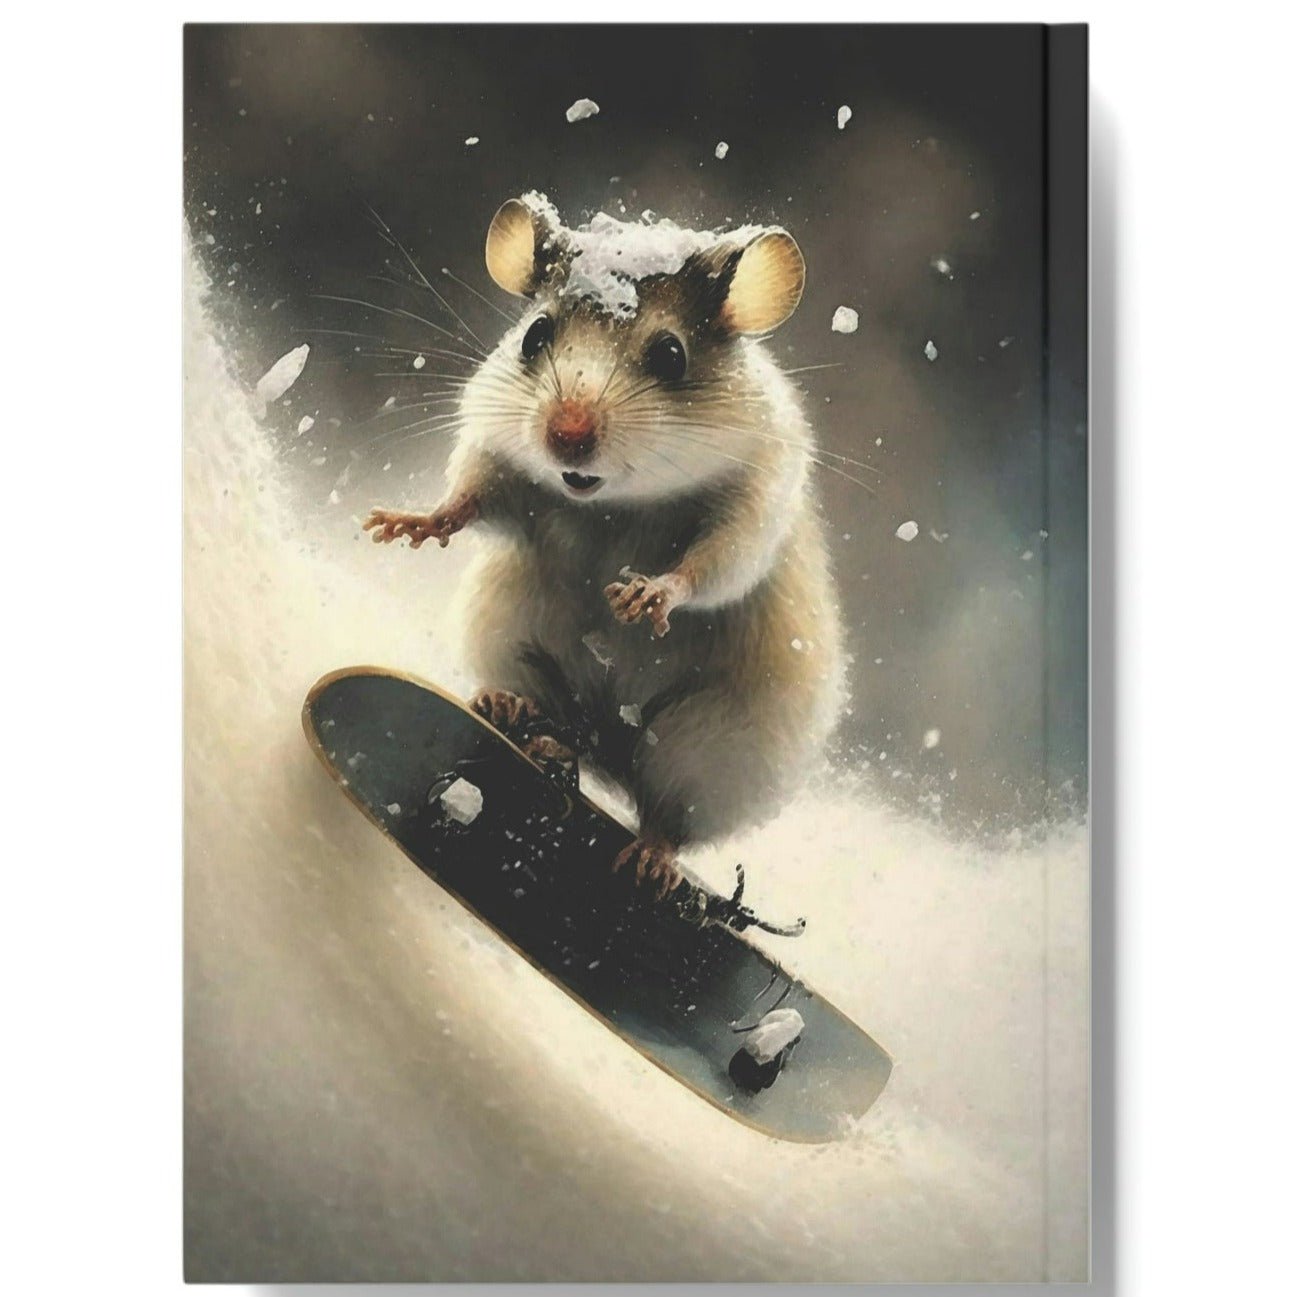 Snowboarding Mouse Hard Backed Journal